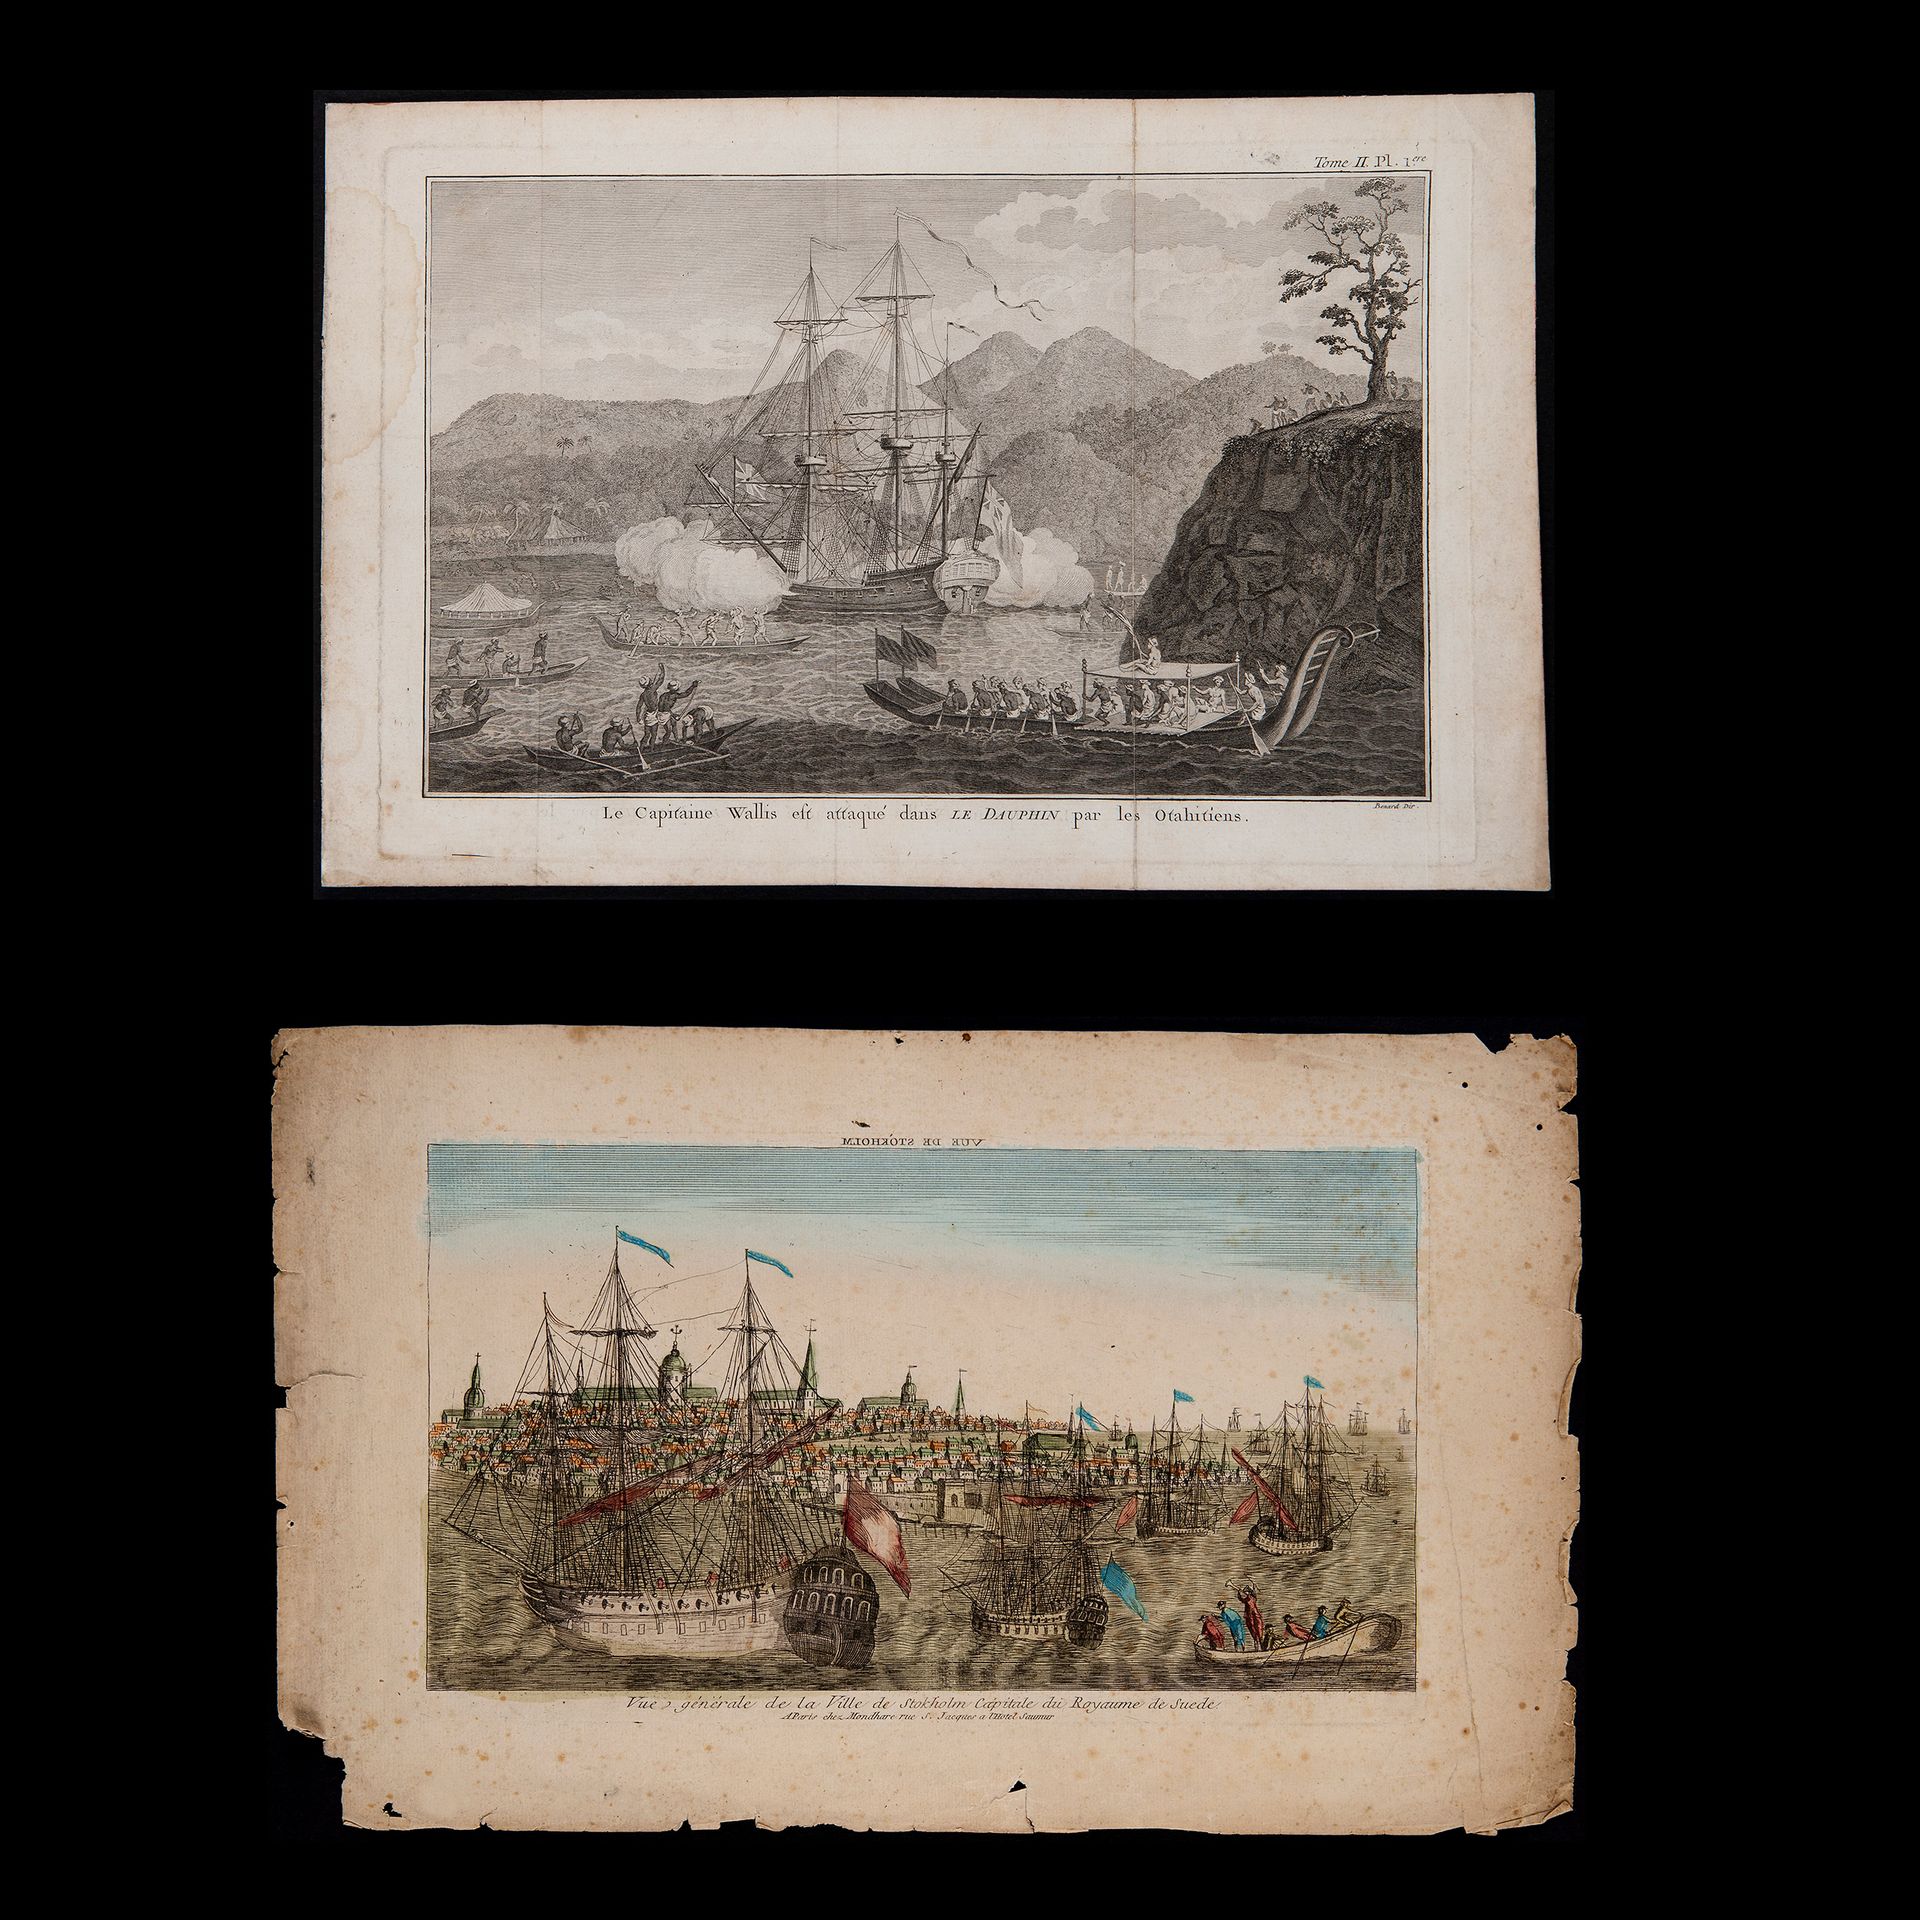 Two valuable engravings depicting a view of Stockholm and the ship 'Capitaine Wa&hellip;